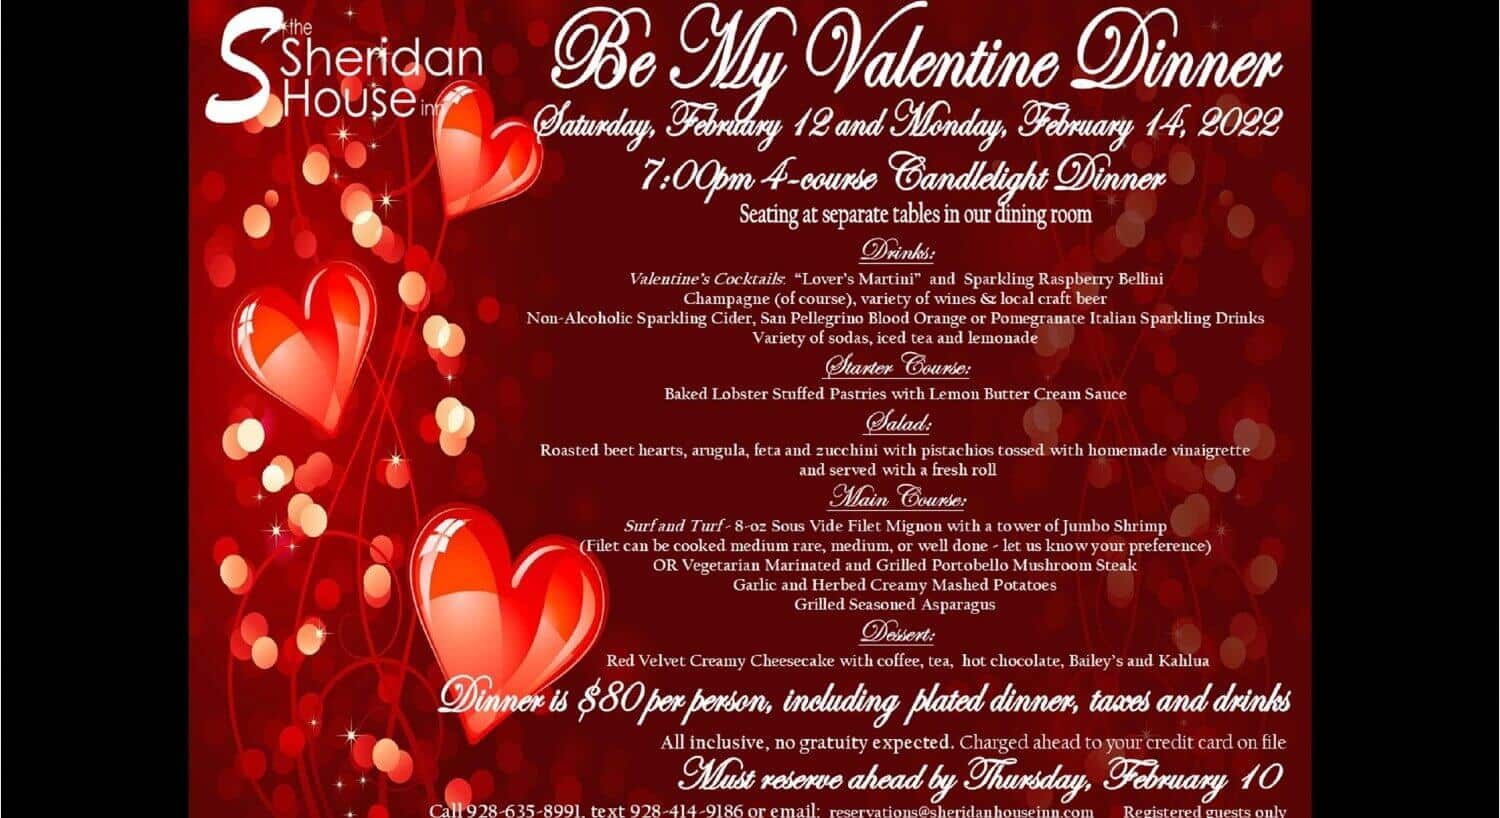 Be My Valentine Dinner Invitation for 4-course dinner February 12 and February 14 at 7:00 pm